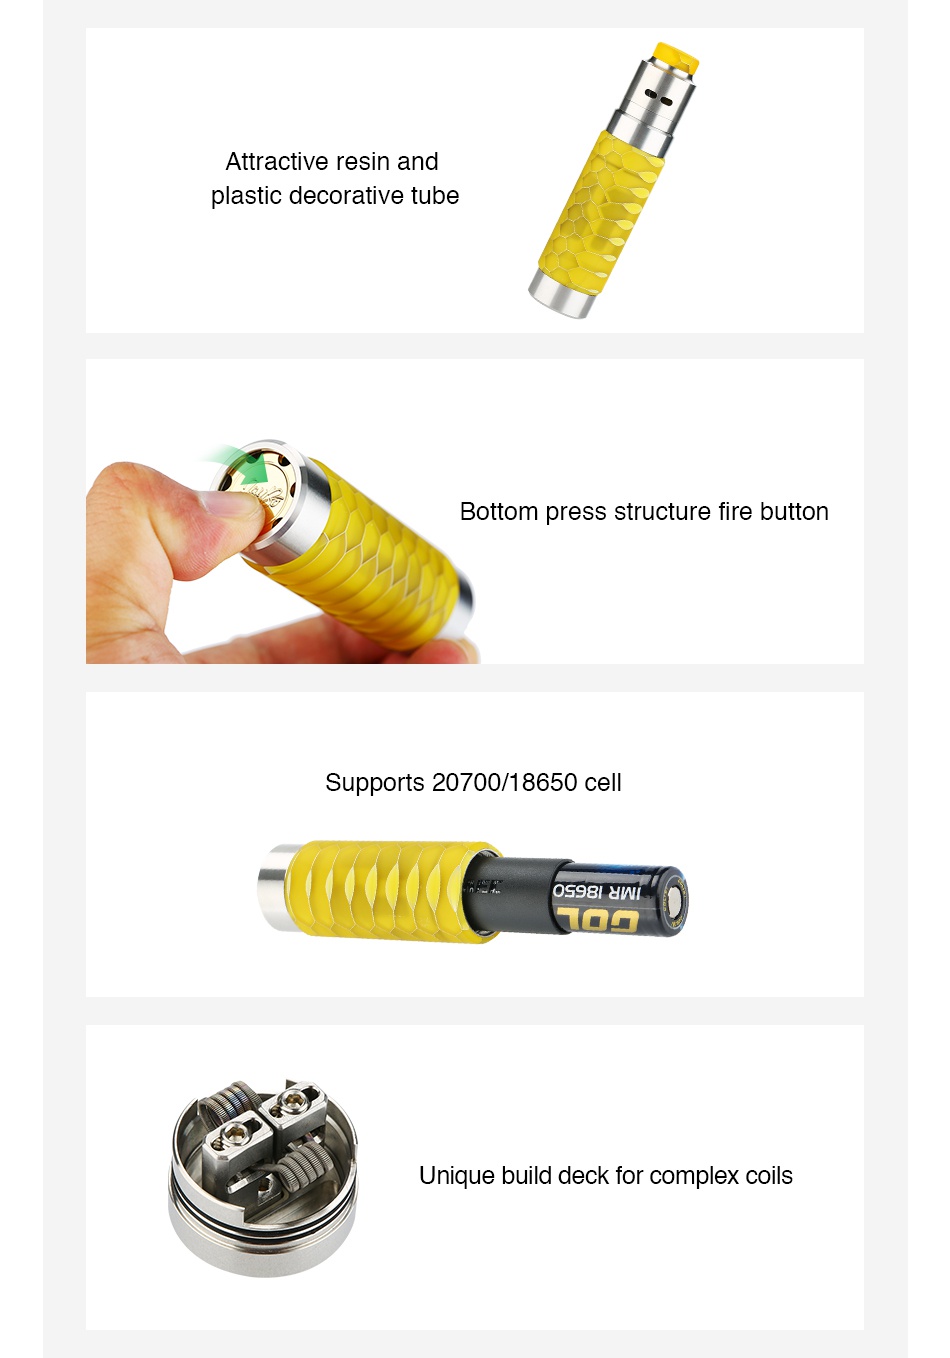 WISMEC Reuleaux RX Machina 20700 Mech MOD with Guillotine RDA Kit Attractive resin and plastic decorative tube Bottom press structure fire button Supports 20700 18650 C OS981 dWI Unique build deck for complex coils